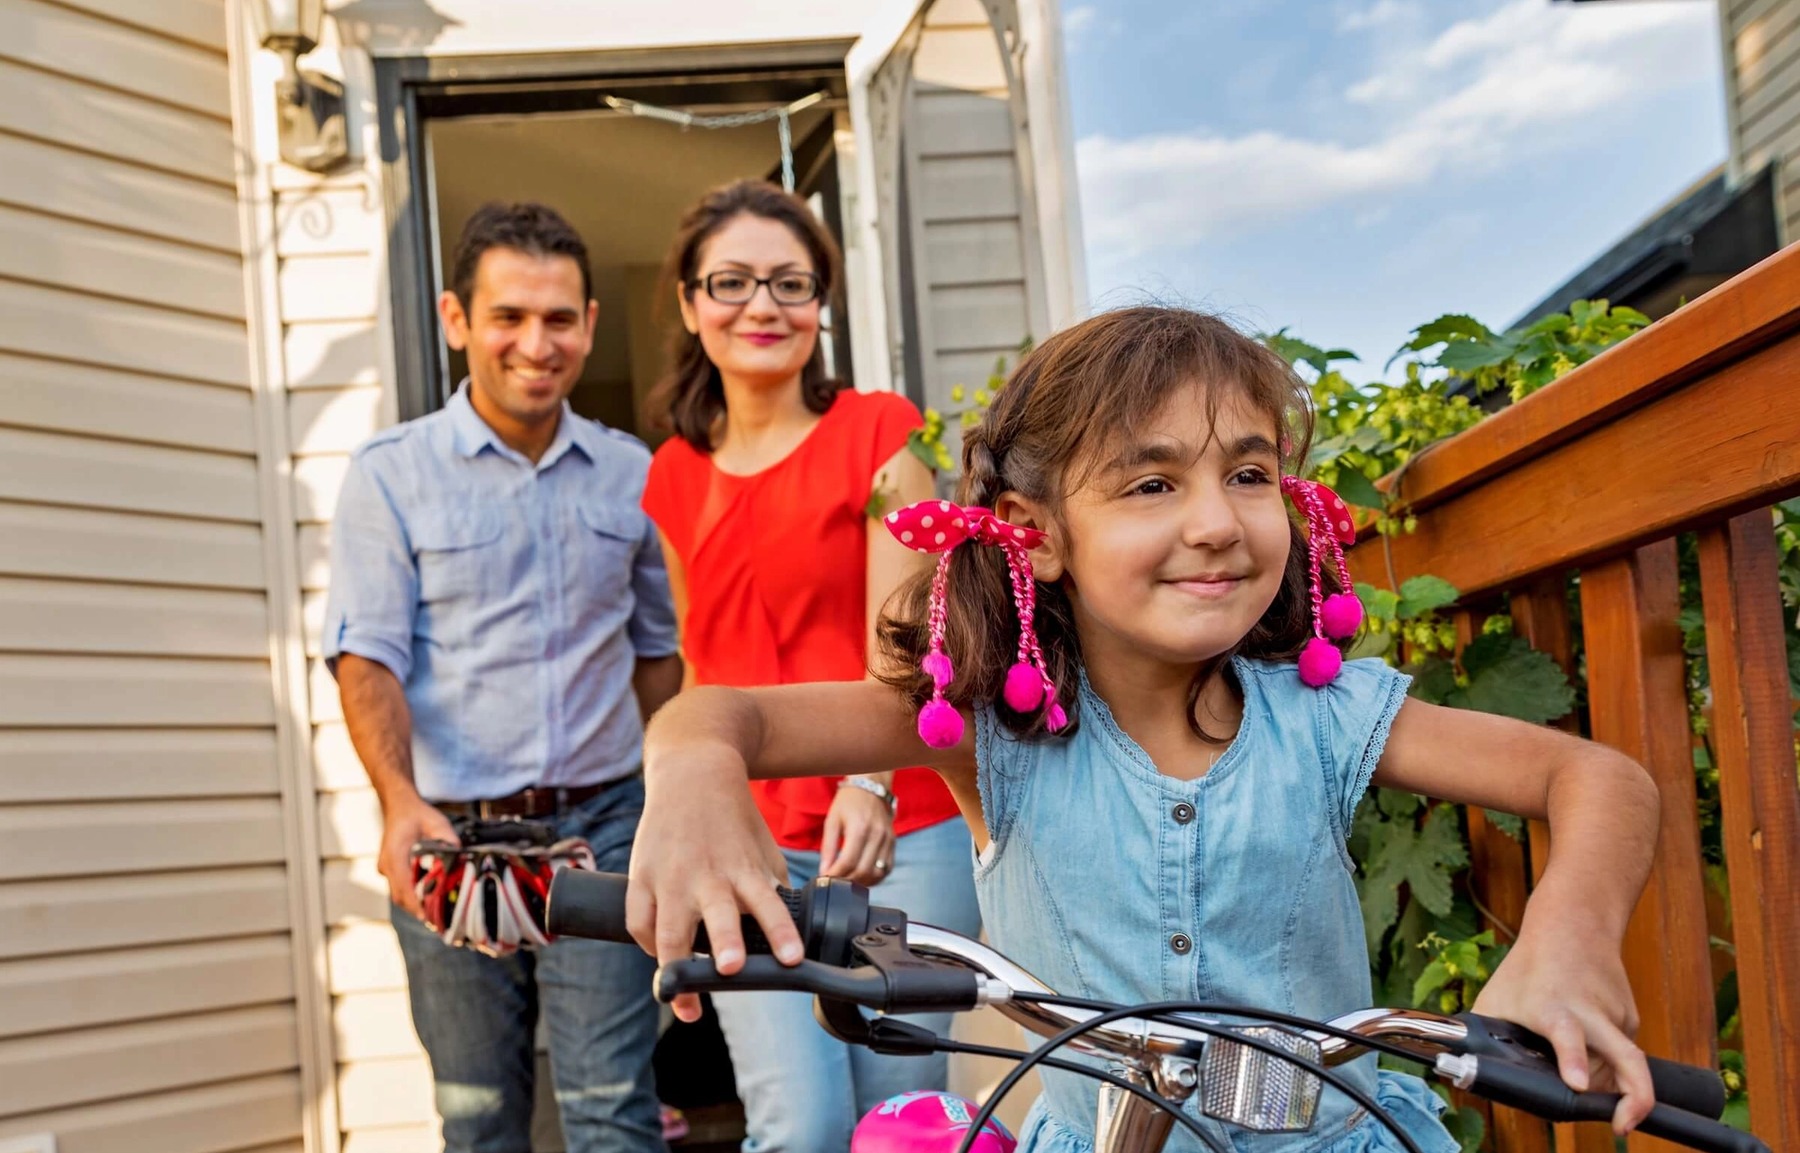 Two parents follow behind a young girl with pink decorations in her hair as she pushes a white bike along their home's deck.